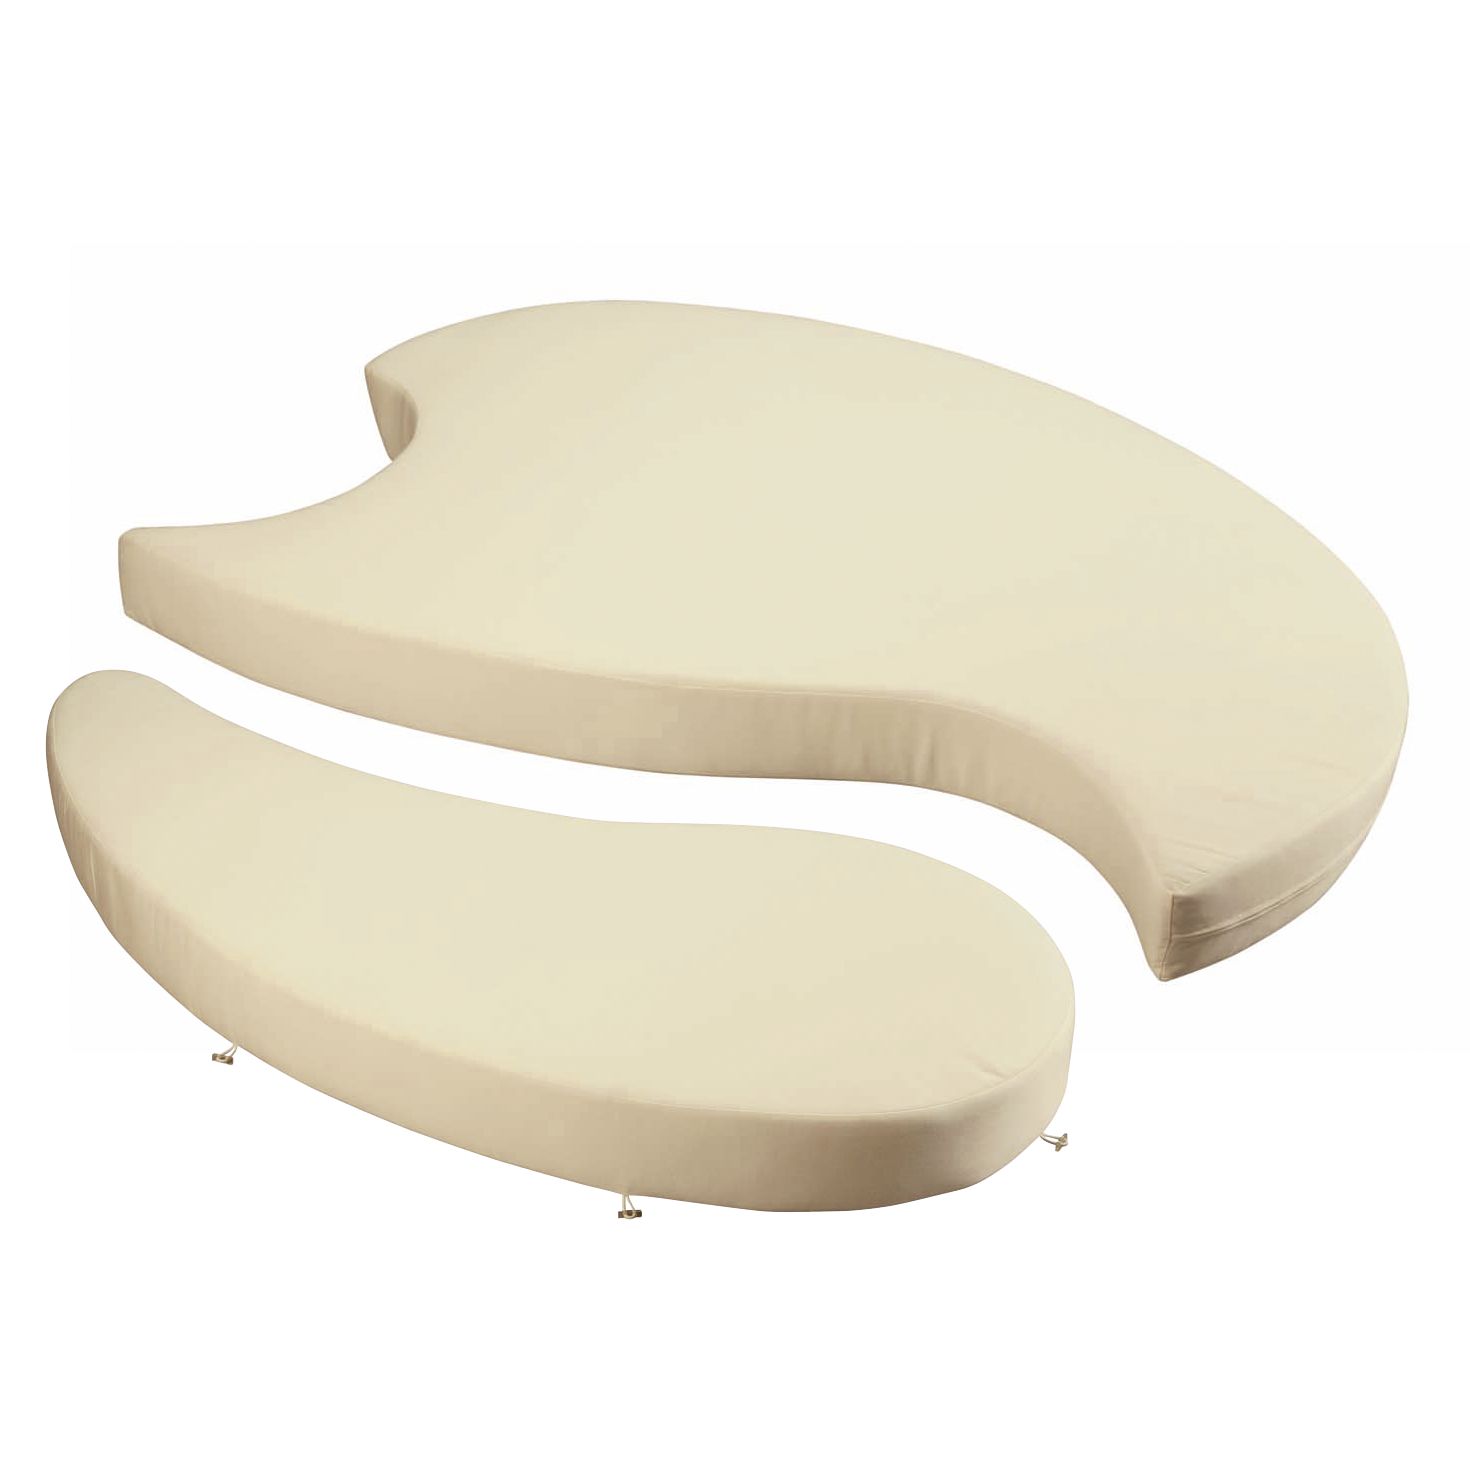 Barlow Tyrie Dune Day Bed Seat & Footstool Cushion Set, White Sands at John Lewis